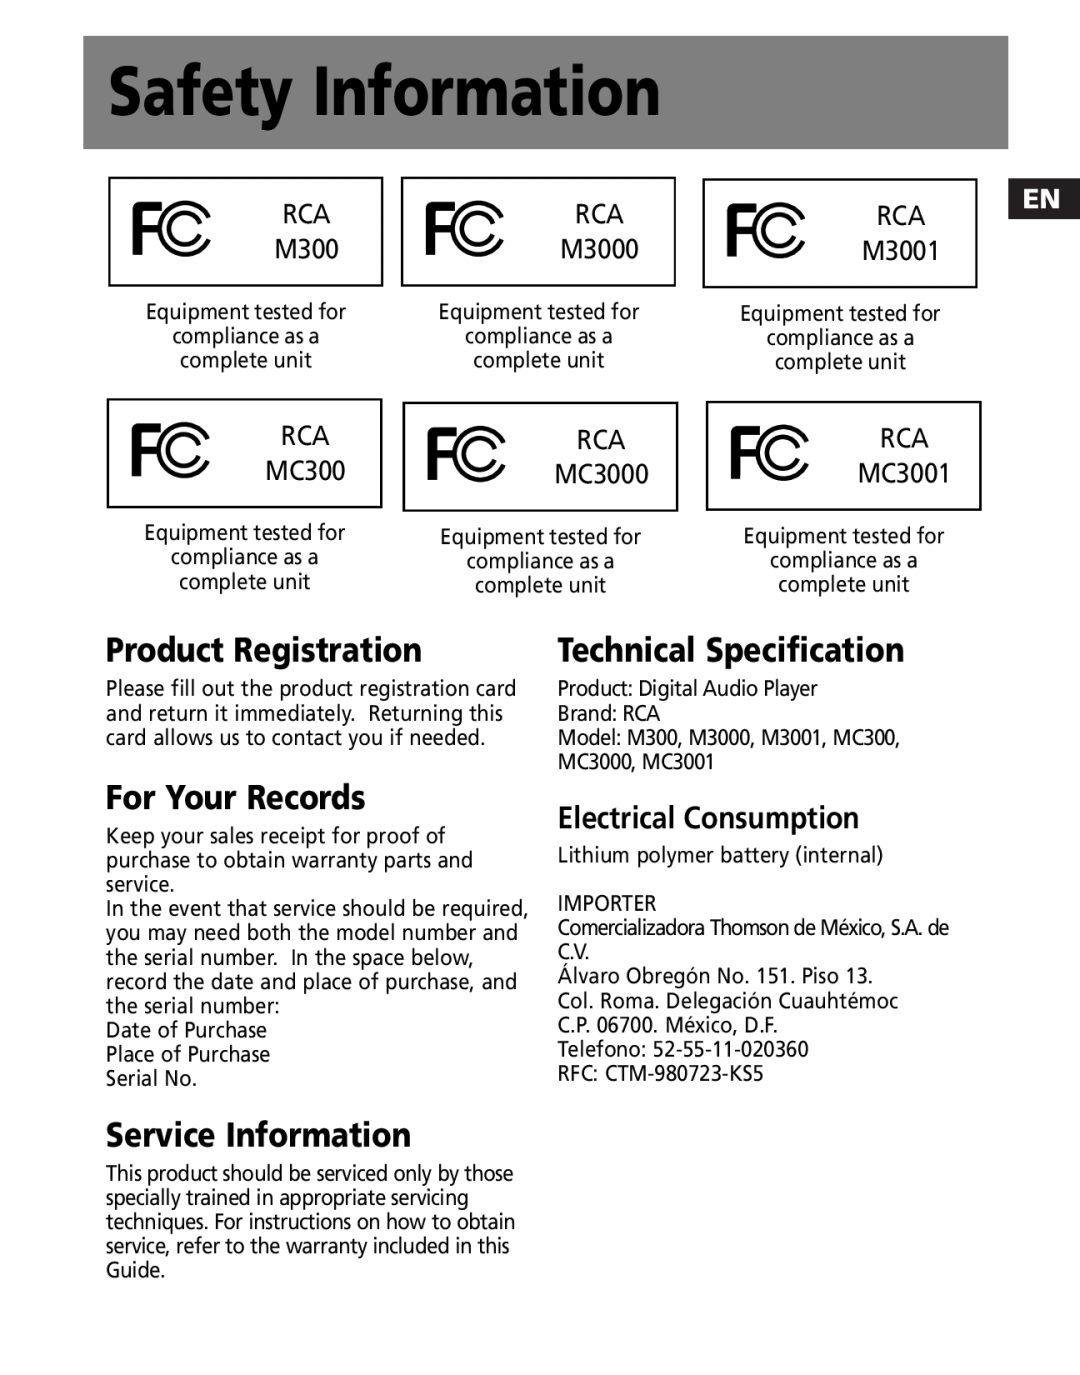 RCA MC3001 Safety Information, Product Registration, For Your Records, Service Information, RCA M3000, RCA M3001 